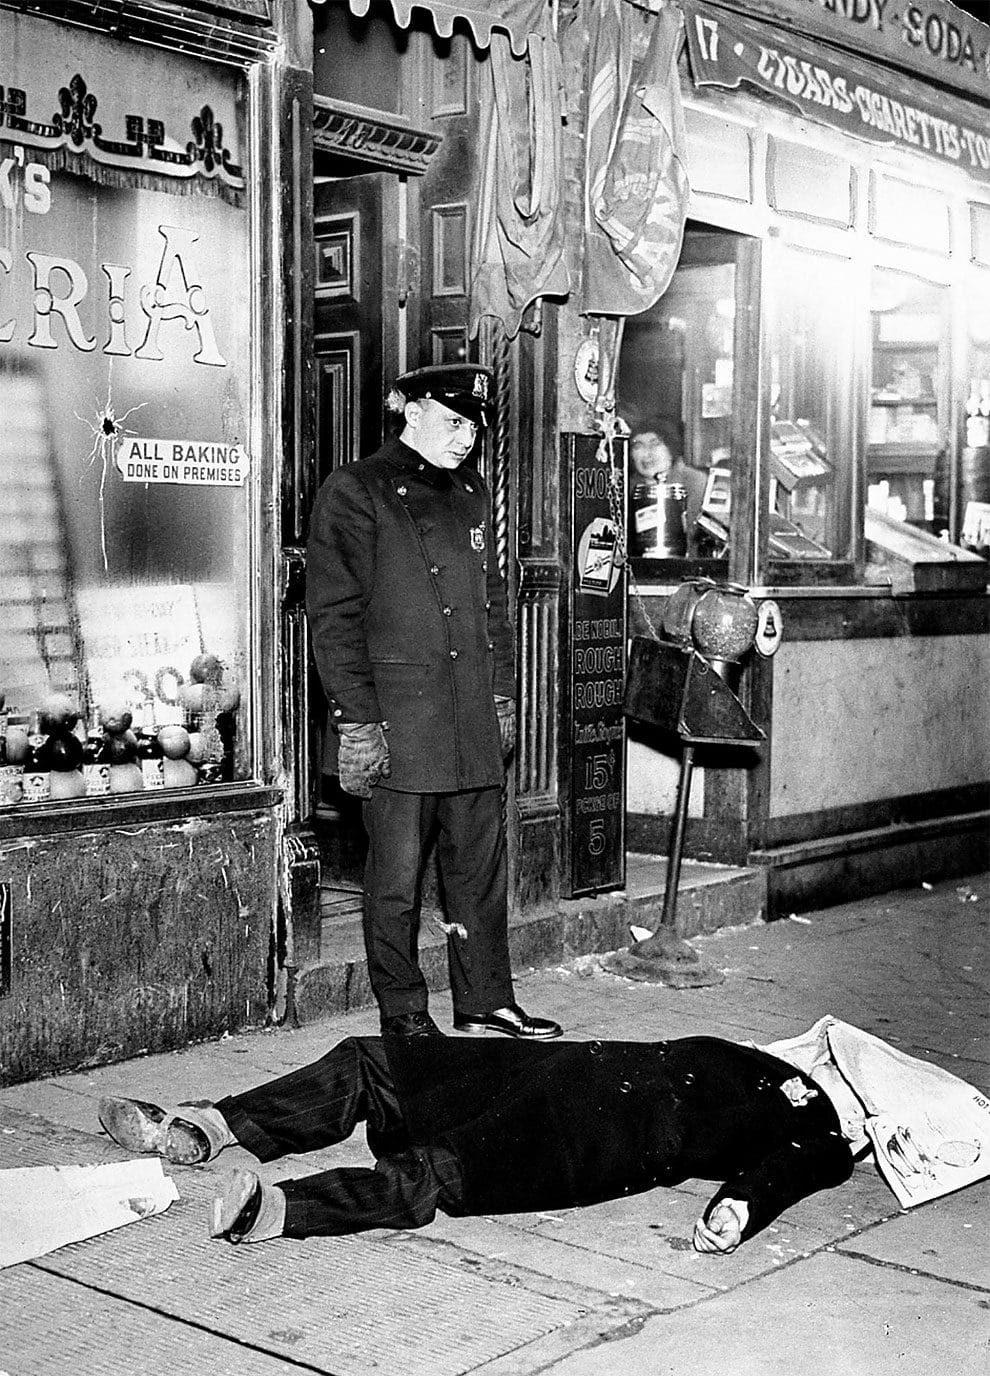 Body of John (Aces) Mazza lies in front of 17 First Ave. after dying in a gangster’s duel on February 21, 1931